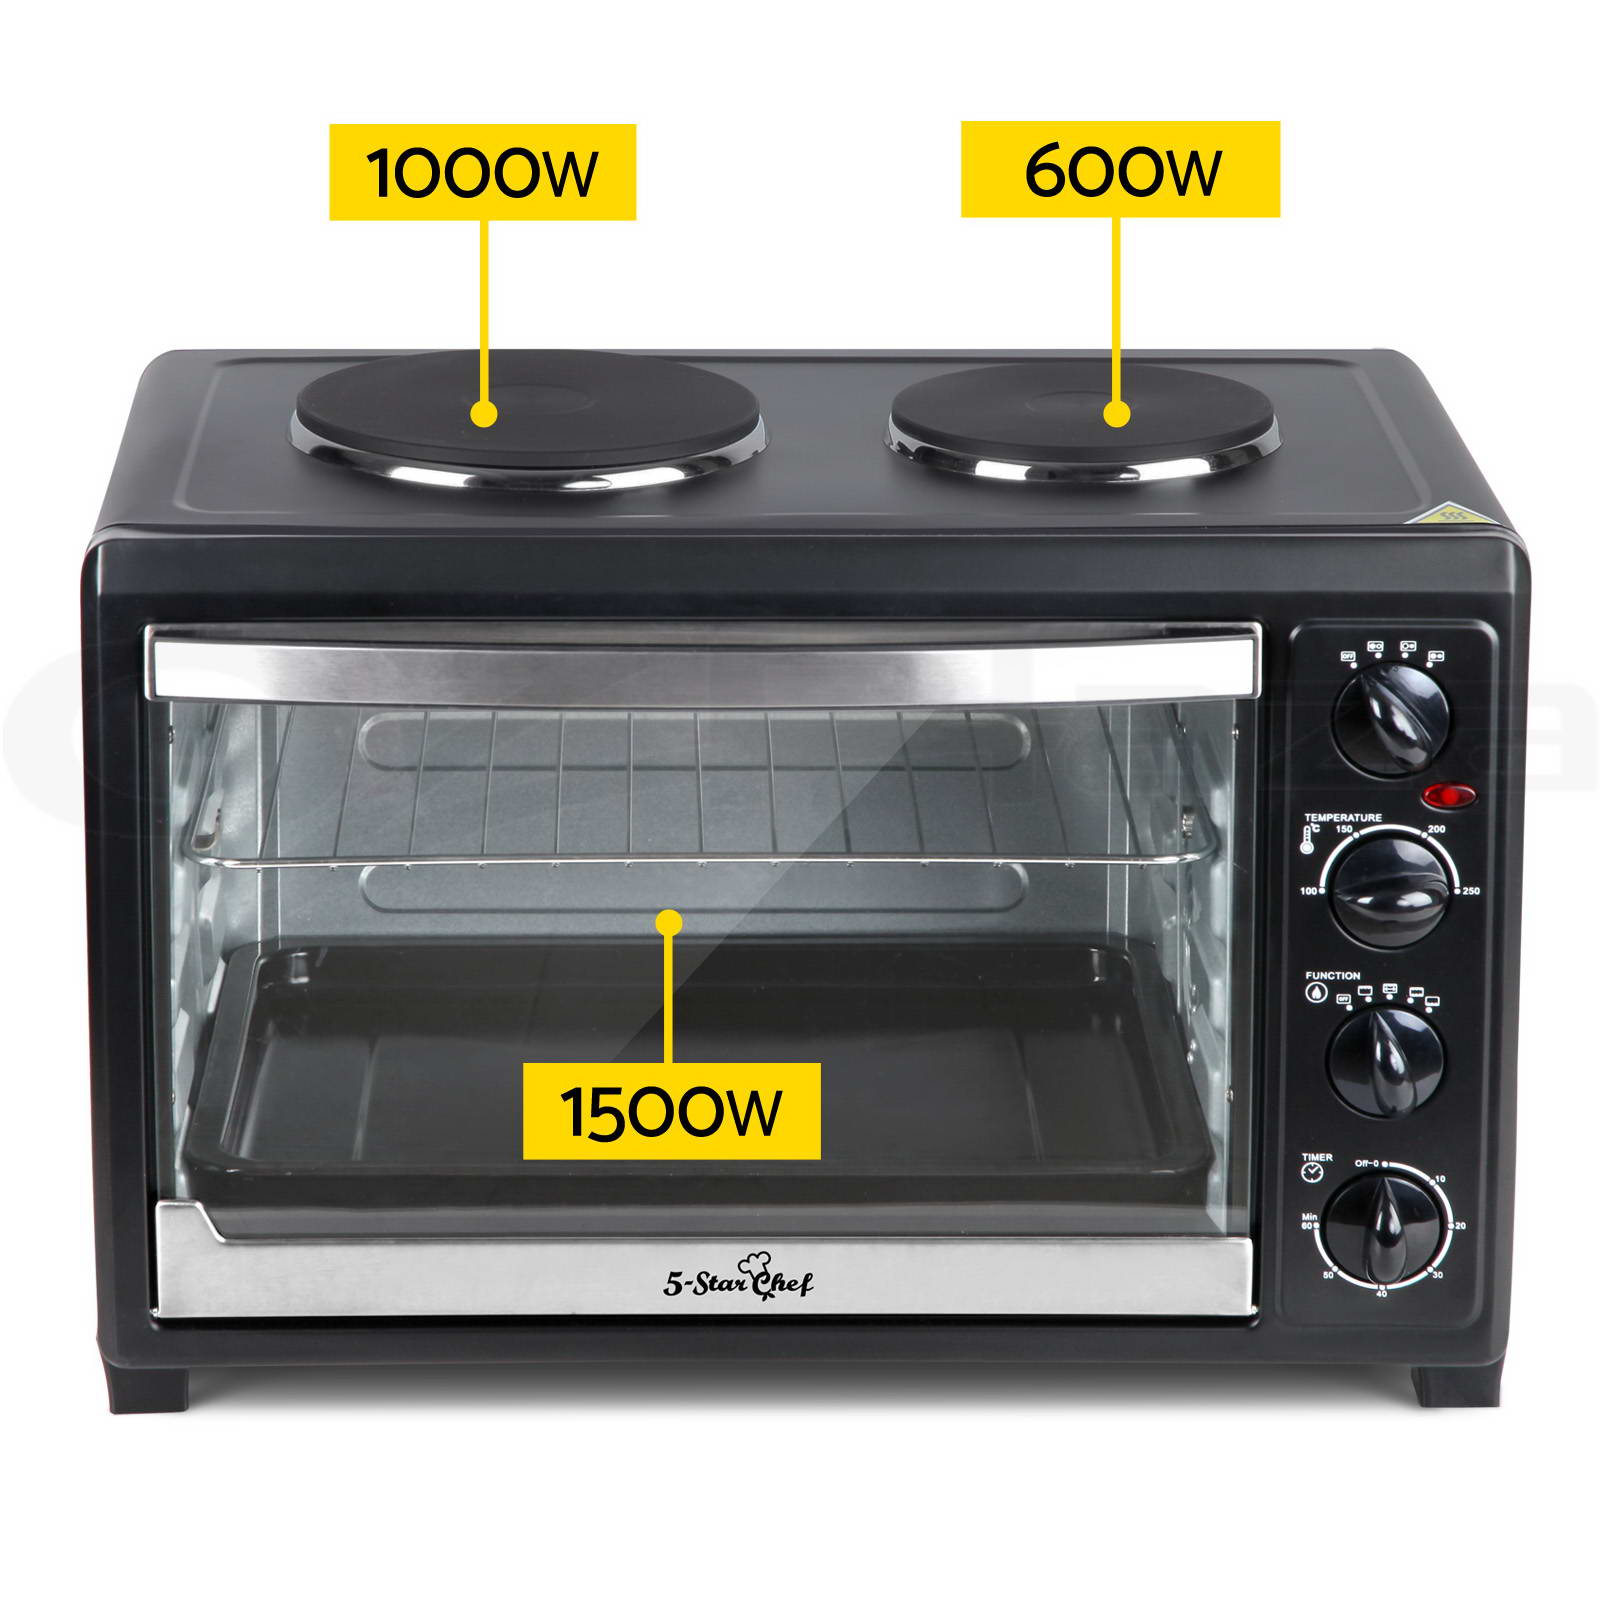 What is a good microwave convection oven for a small family?